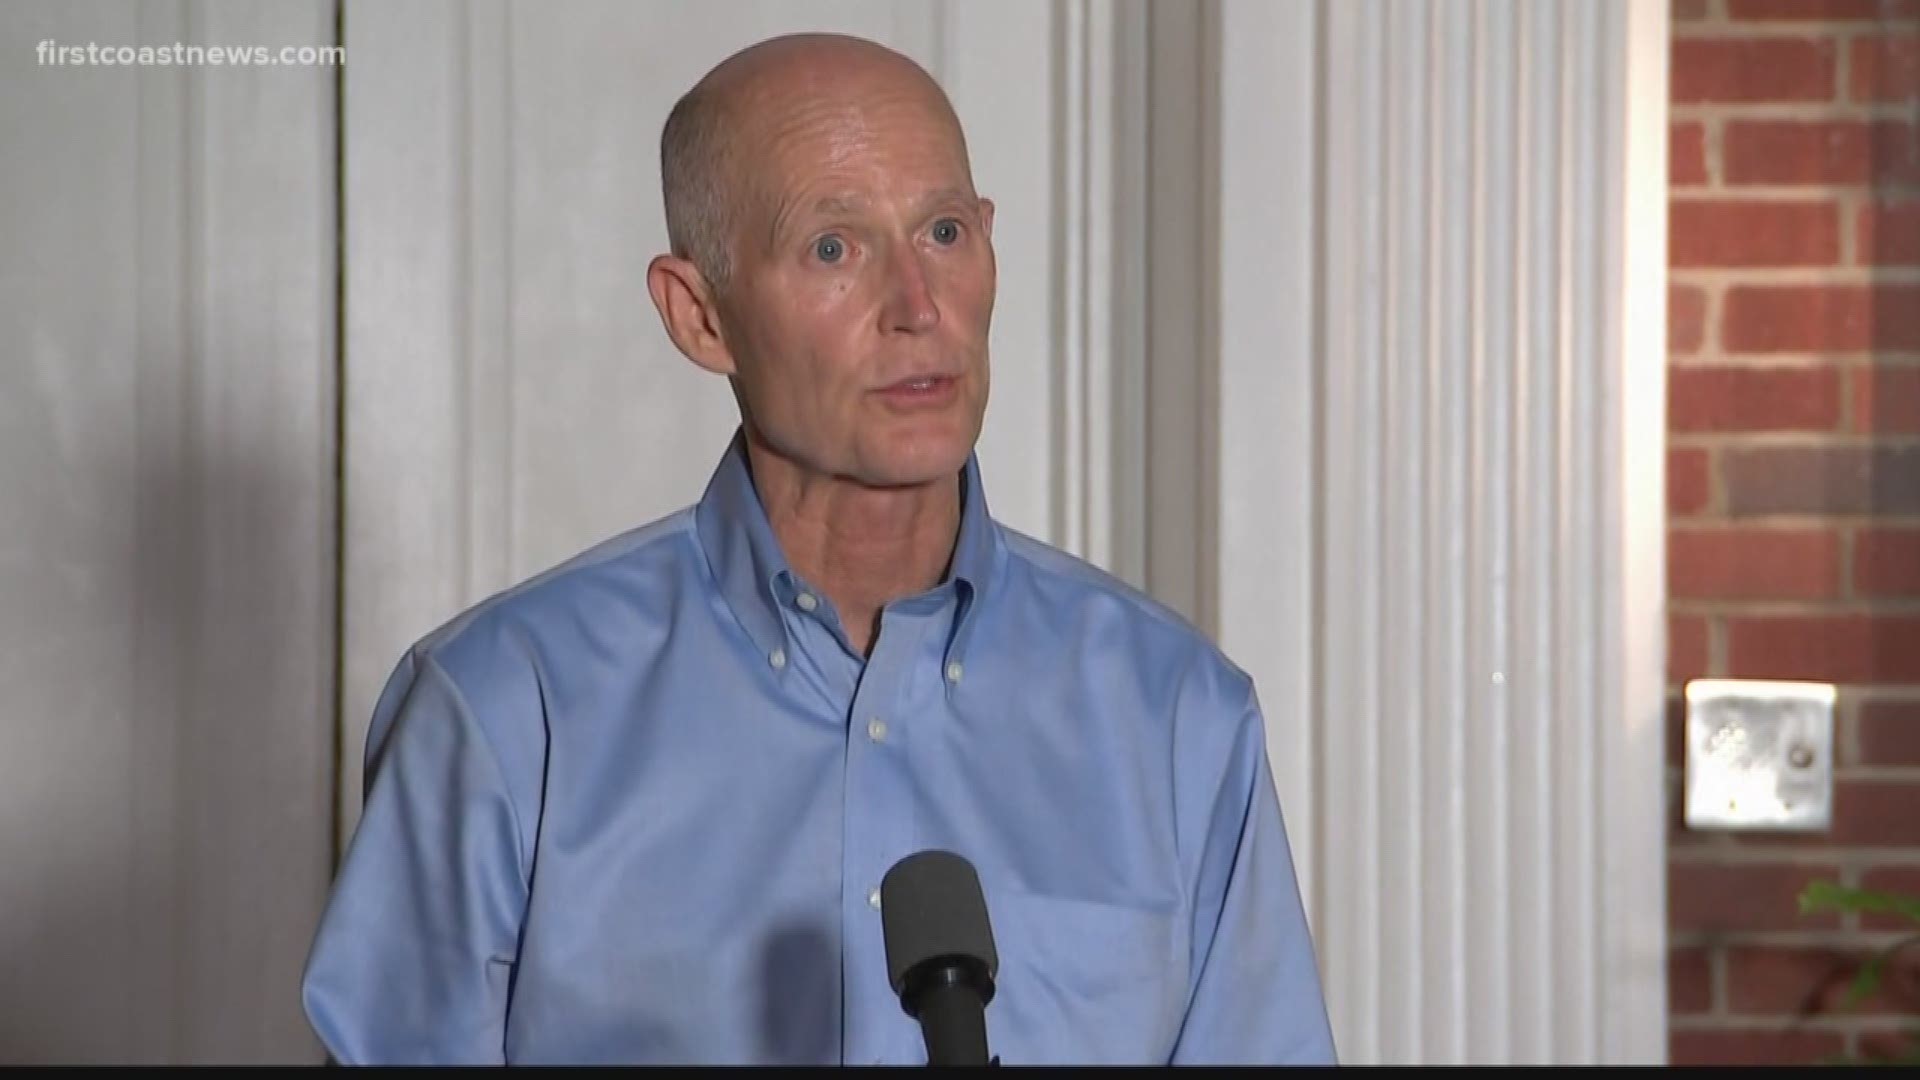 Florida Gov. Rick Scott's campaign for Senate and the National Republican Senatorial Committee have filed a lawsuit as his leading vote margin continues to fall.